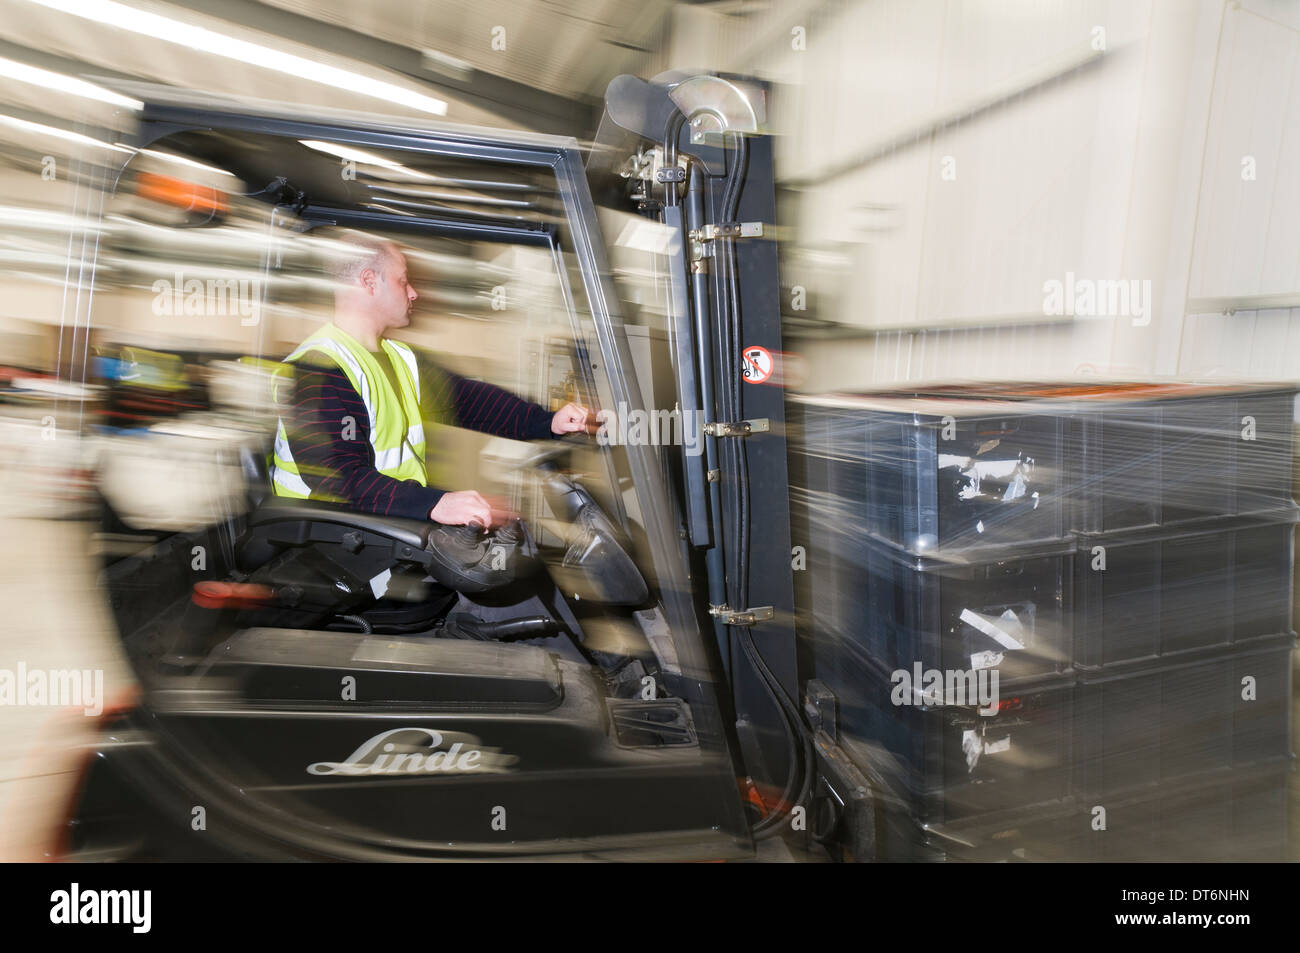 Man operating a forklift truck Stock Photo